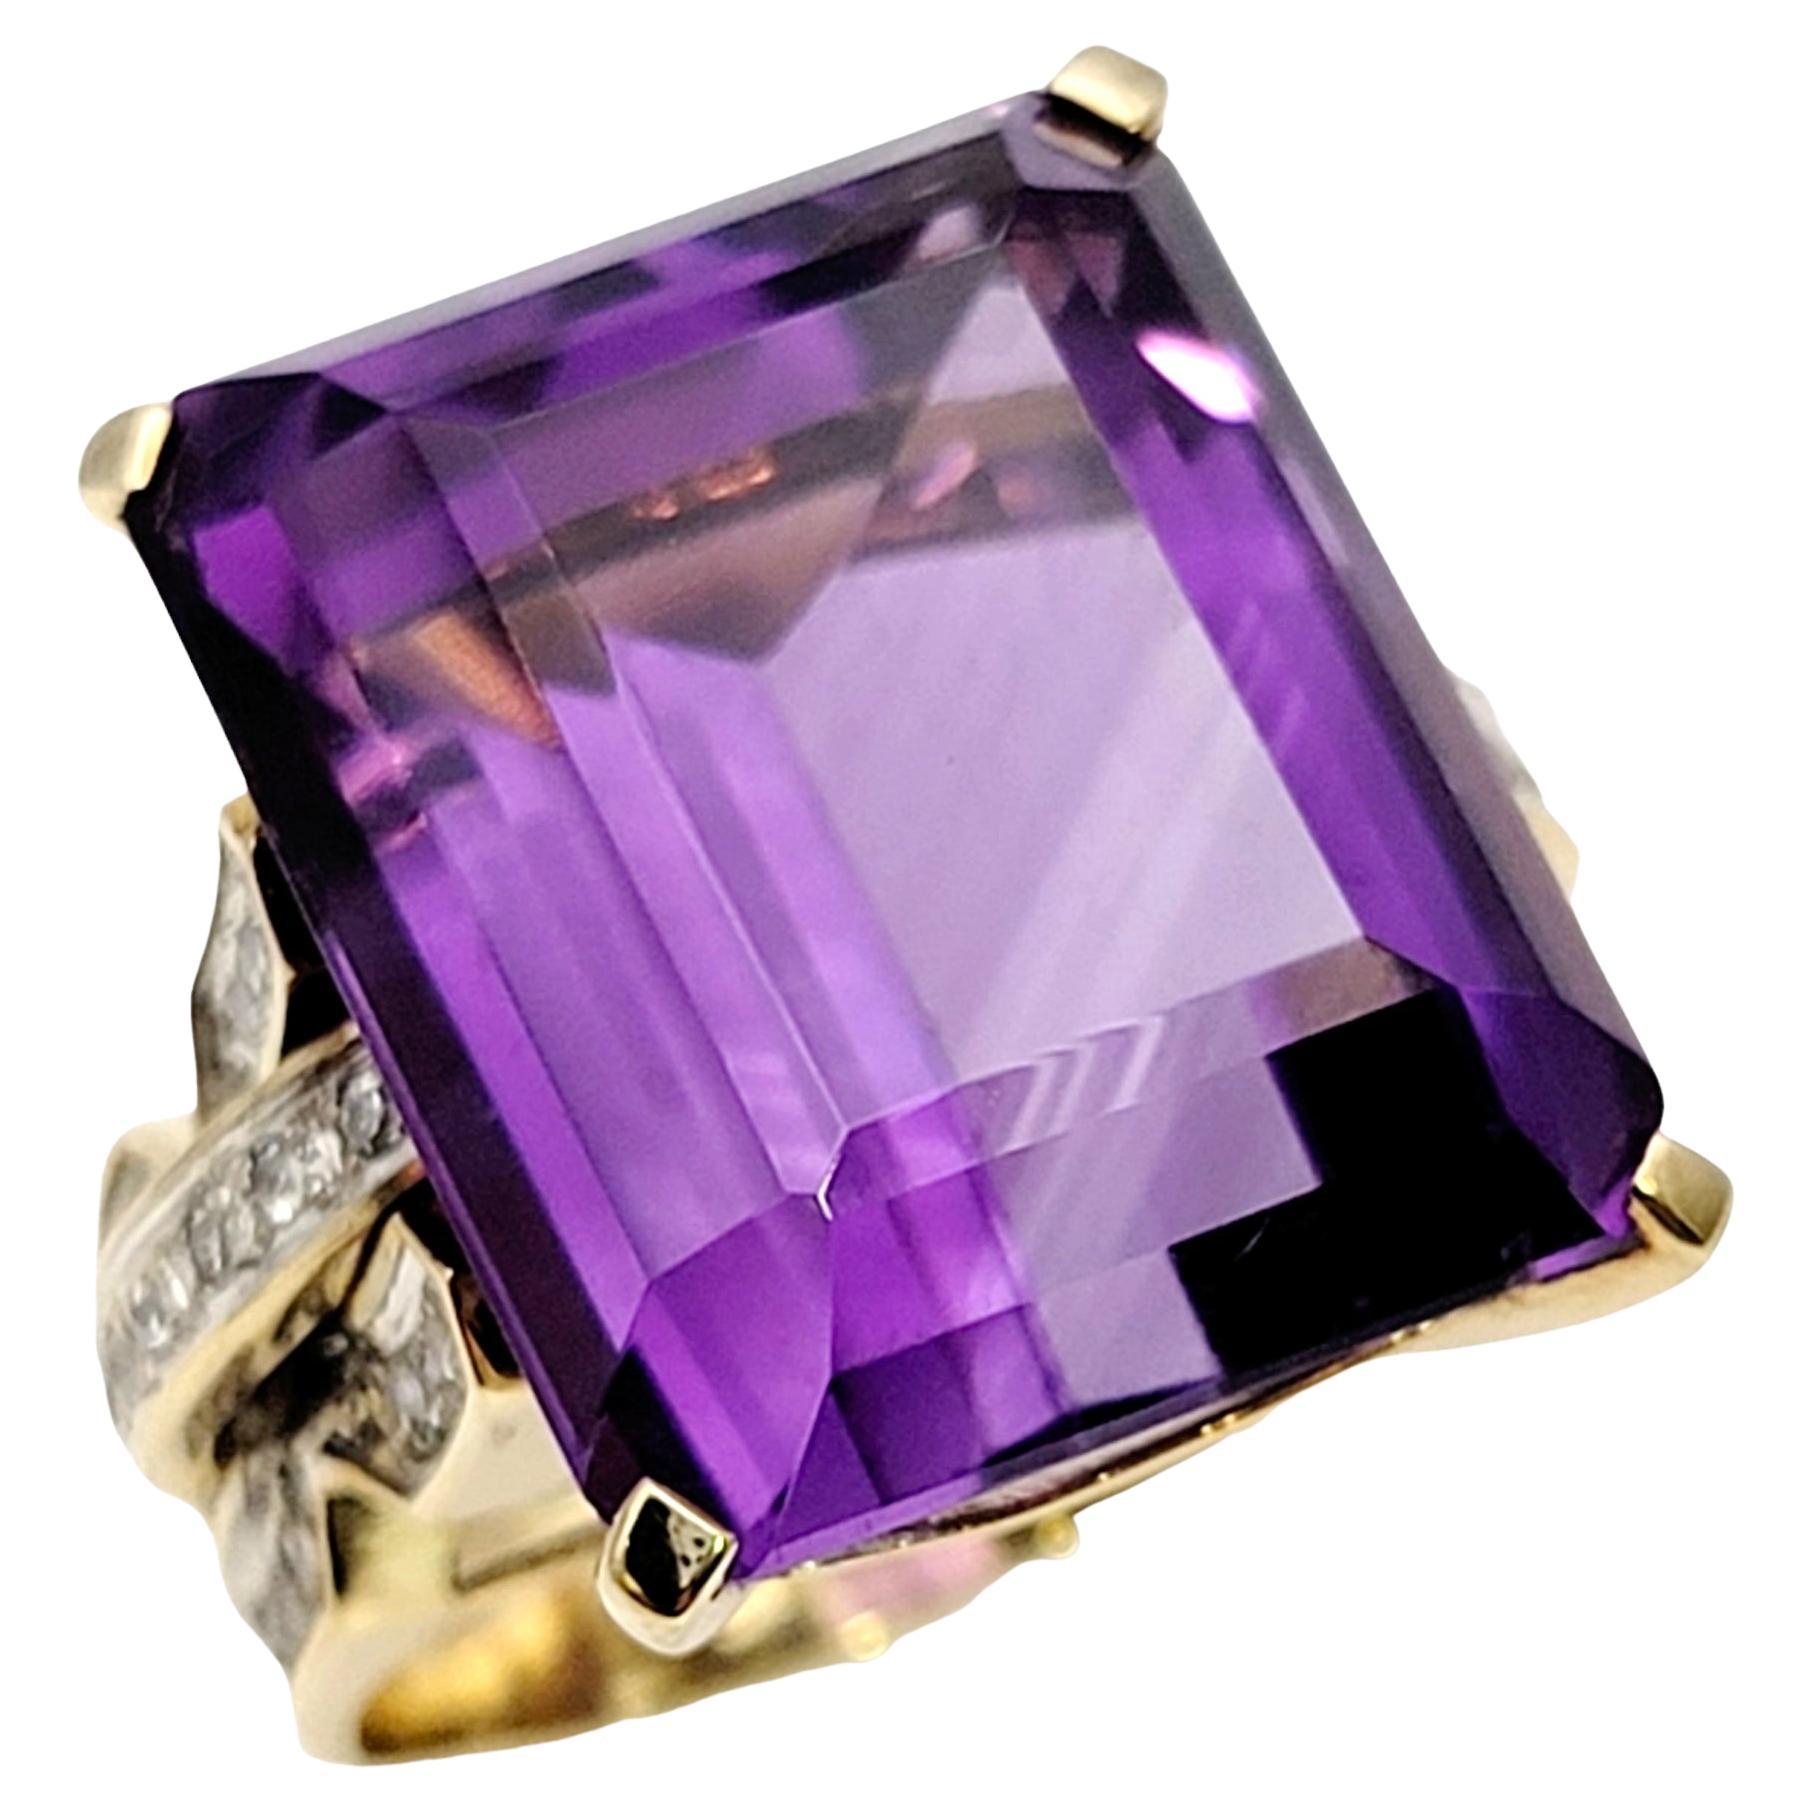 Huge 34.85 Carat Emerald Cut Amethyst Cocktail Ring with Side Diamond Detailing For Sale